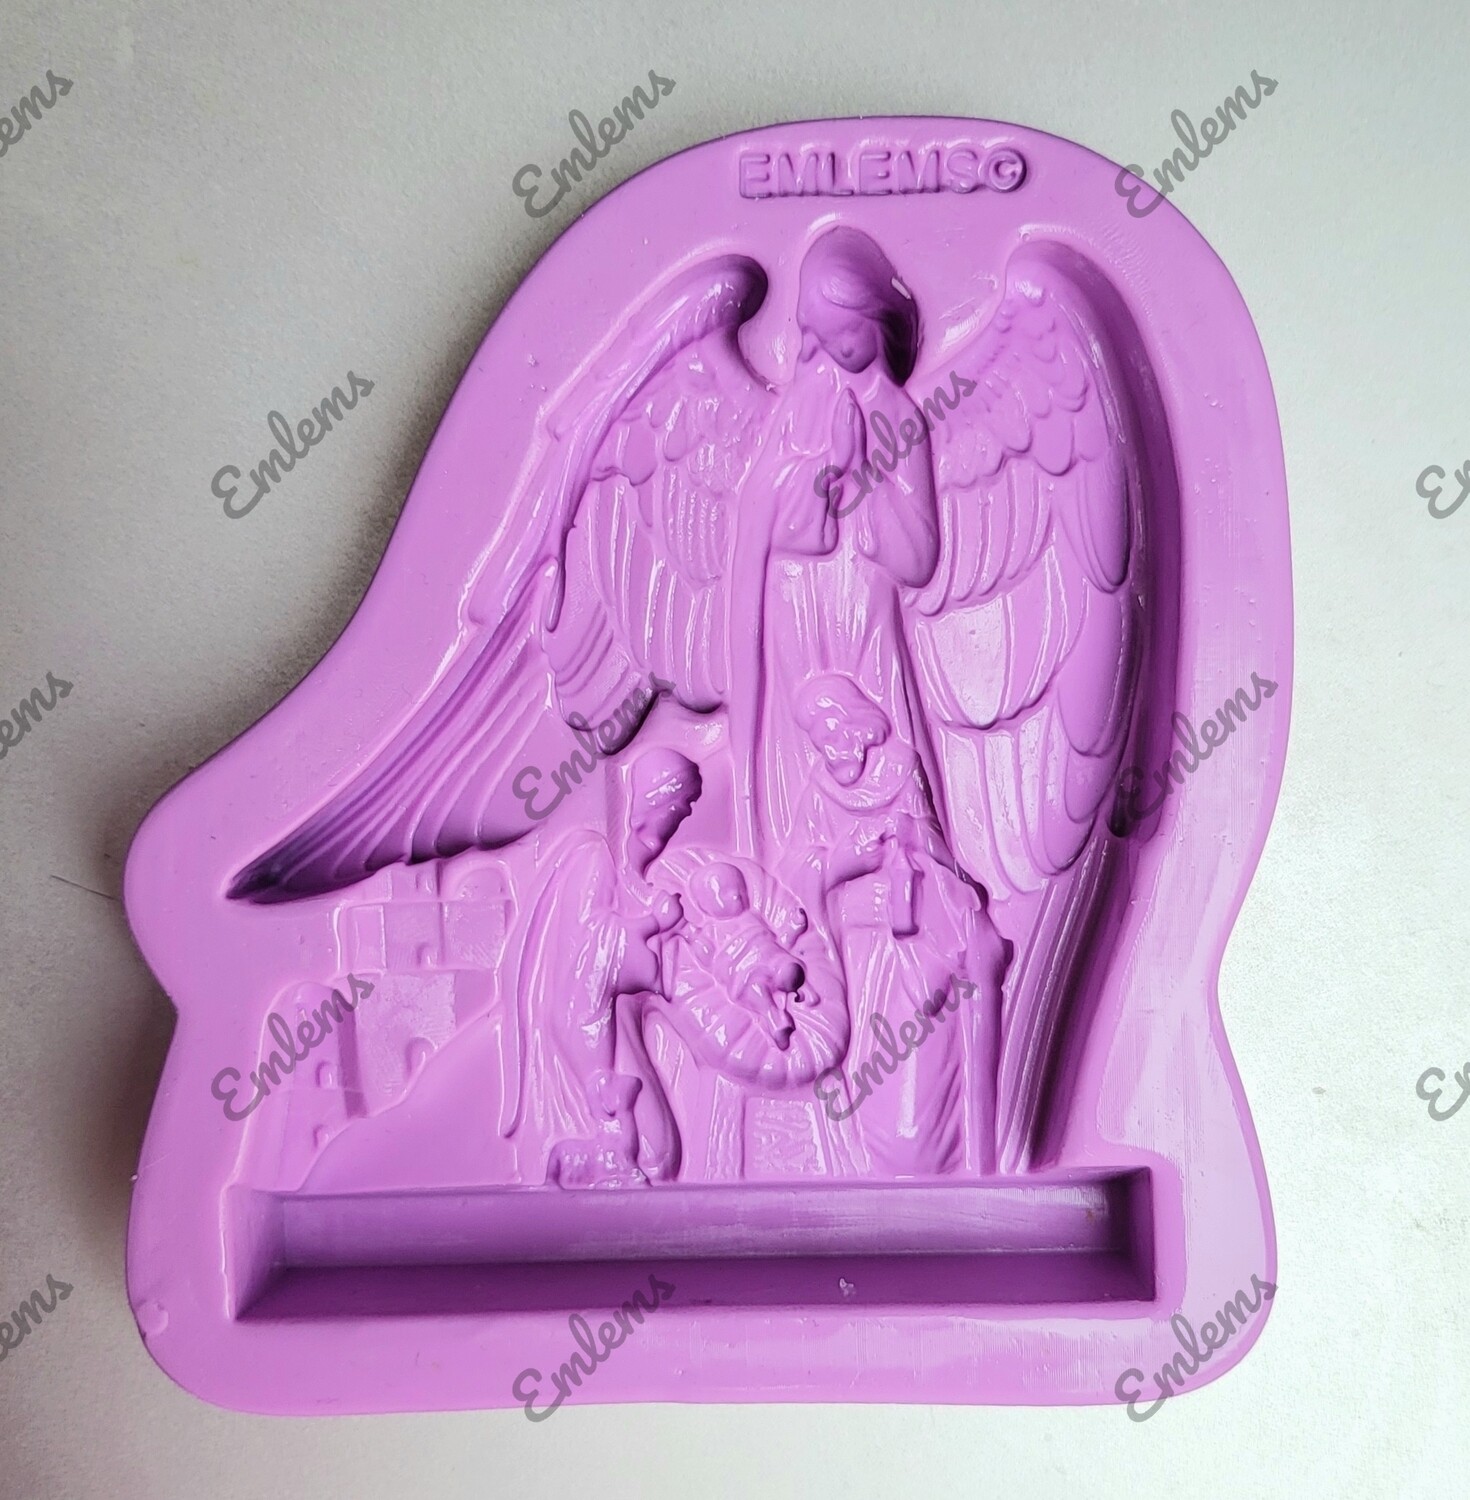 EMLEMS NATIVITY STAND ALONE ORNAMENTAL SILICONE MOULD